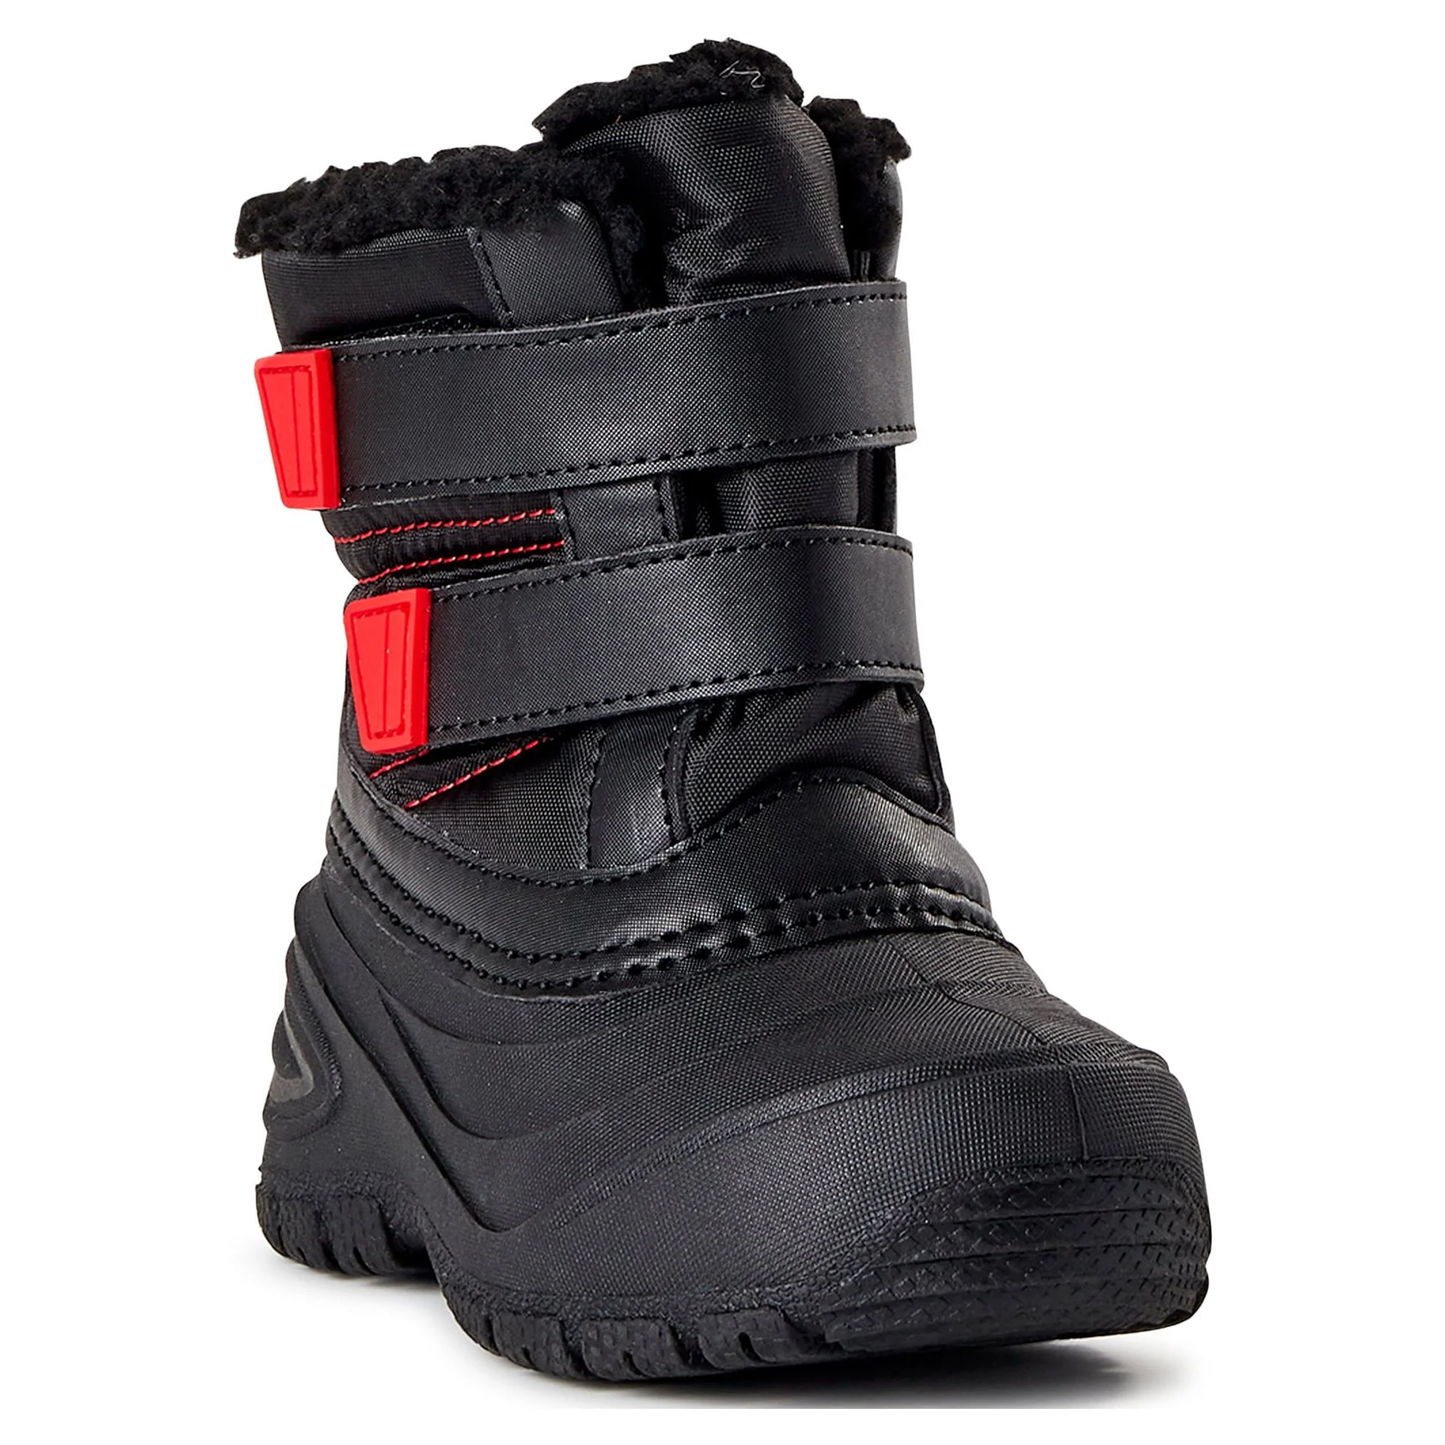 Toddler Boys Water-Repellent Upper With Two Hook and Loop Straps Winter Boots